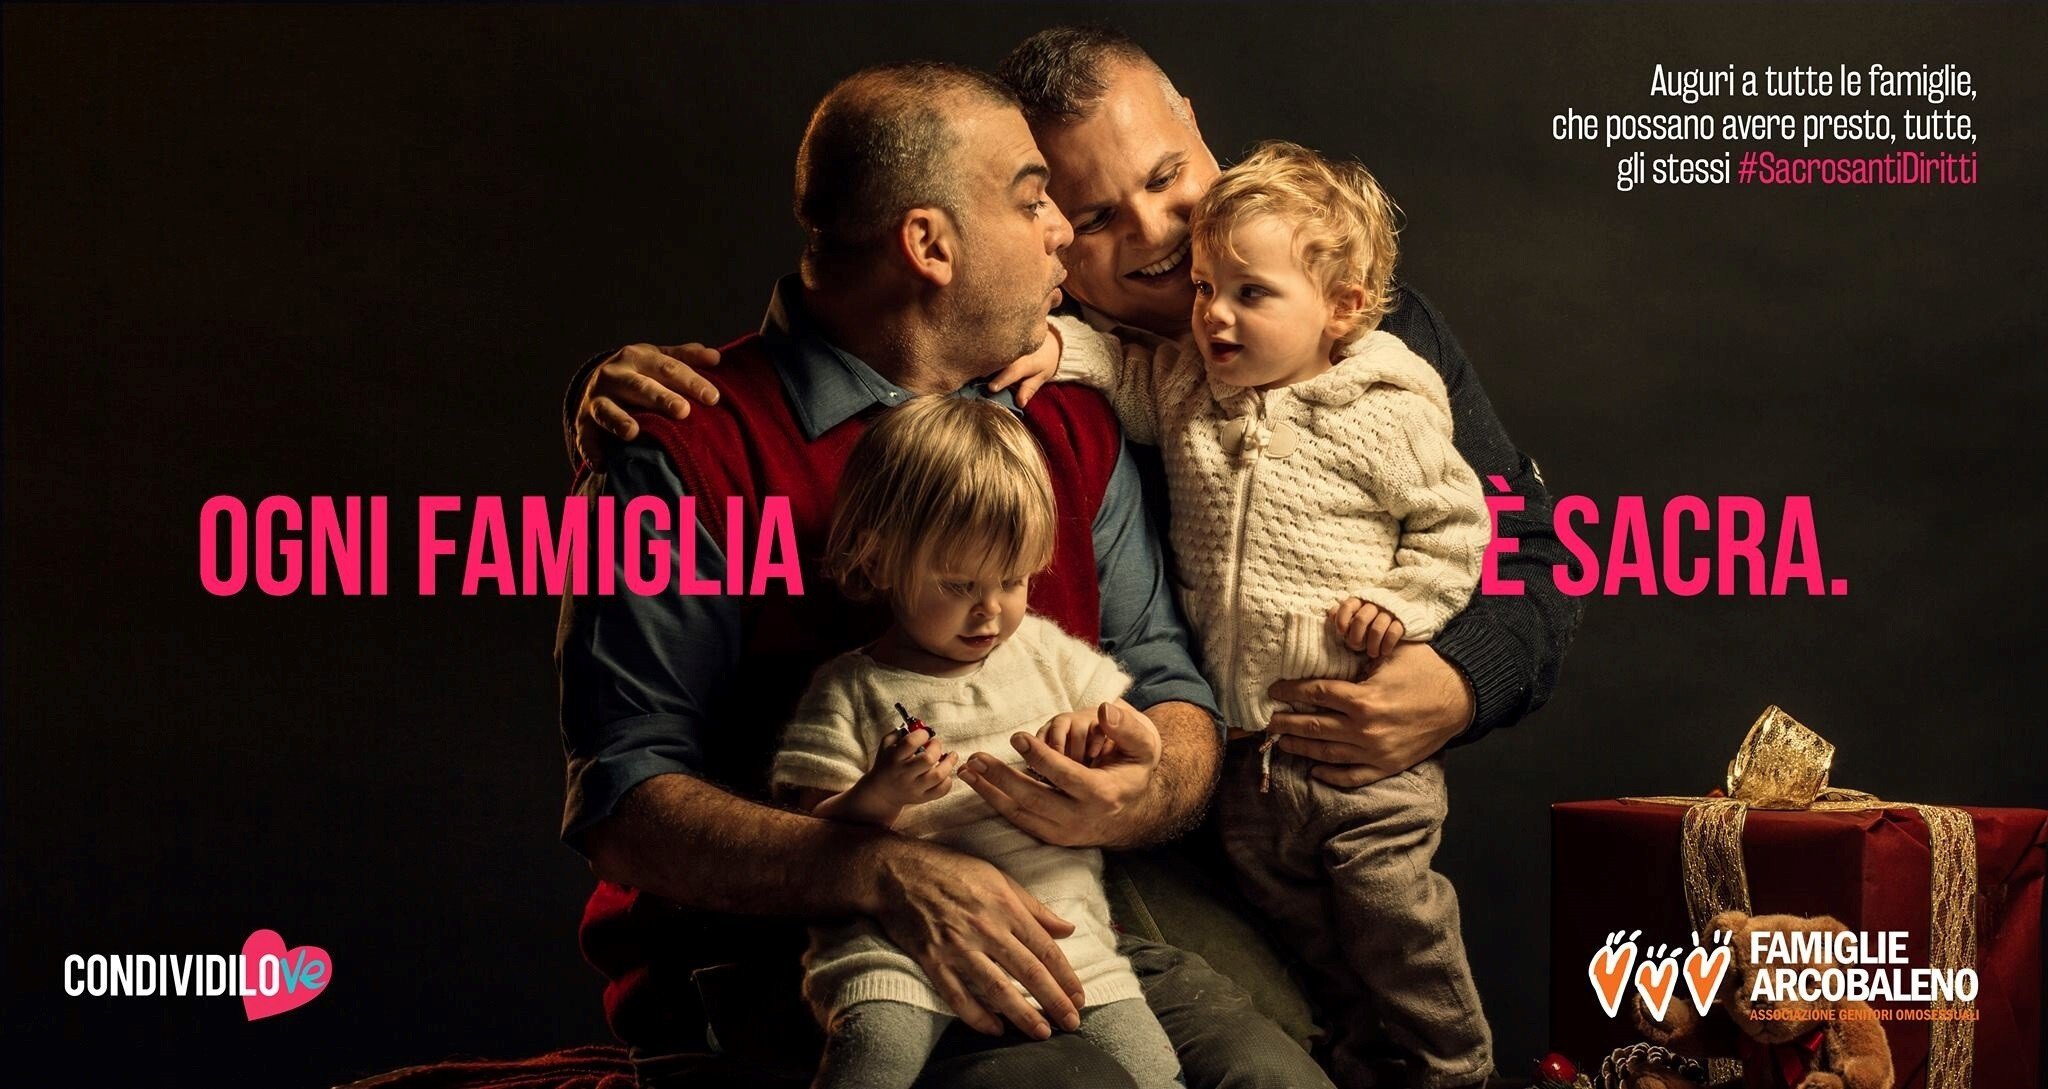 A promotional image by the Italian gay rights group Condividi Love, bearing the slogan, Every Family is Sacred. Photo: Facebook/Condividi Love